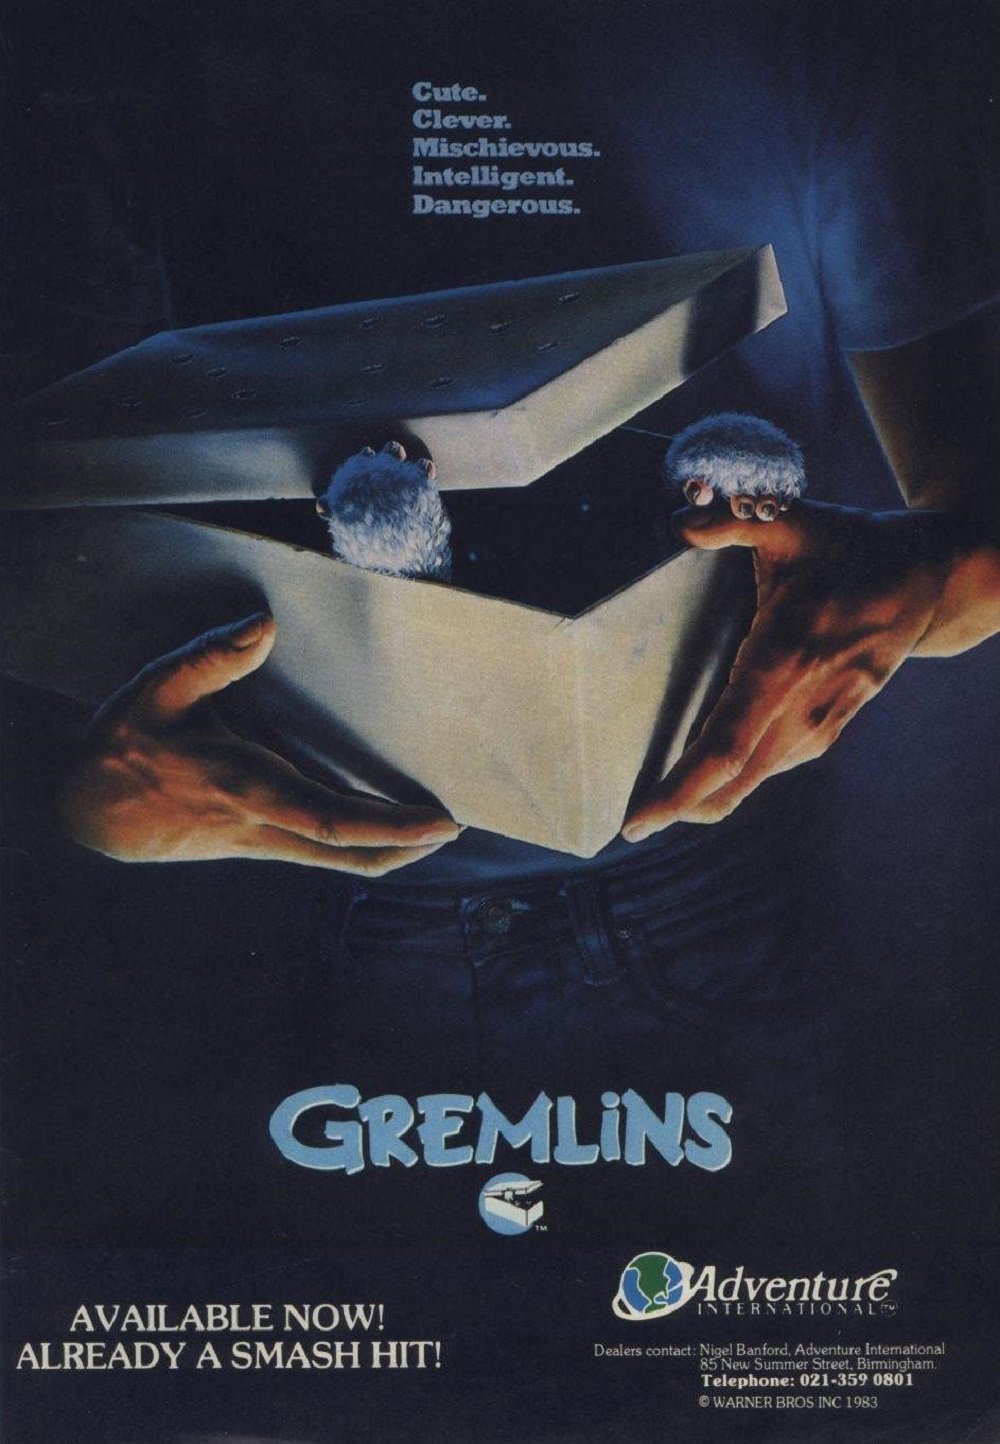 Image of Gremlins: The Adventure